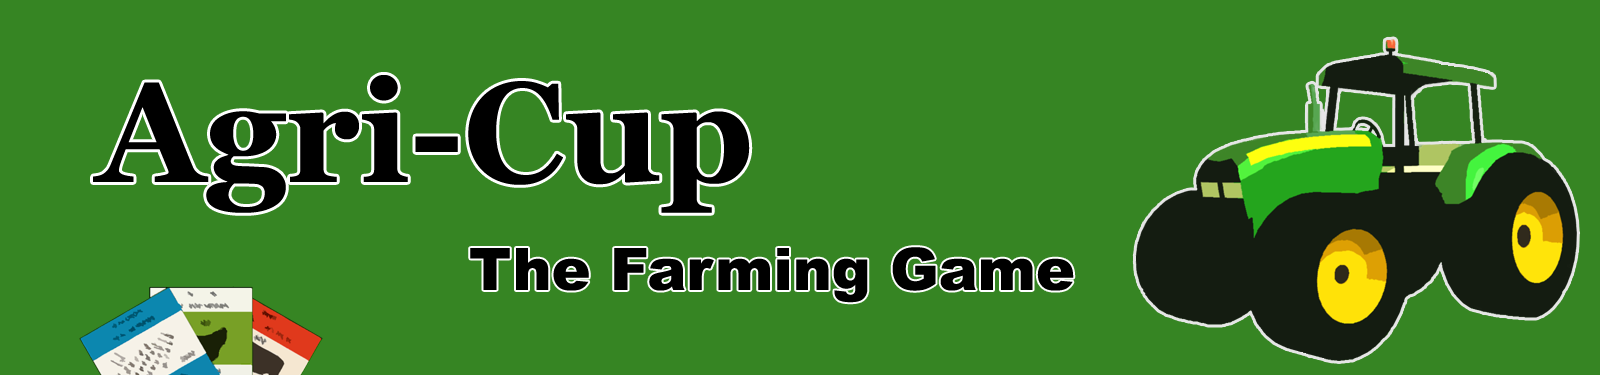 Agri-Cup : The Farming Game